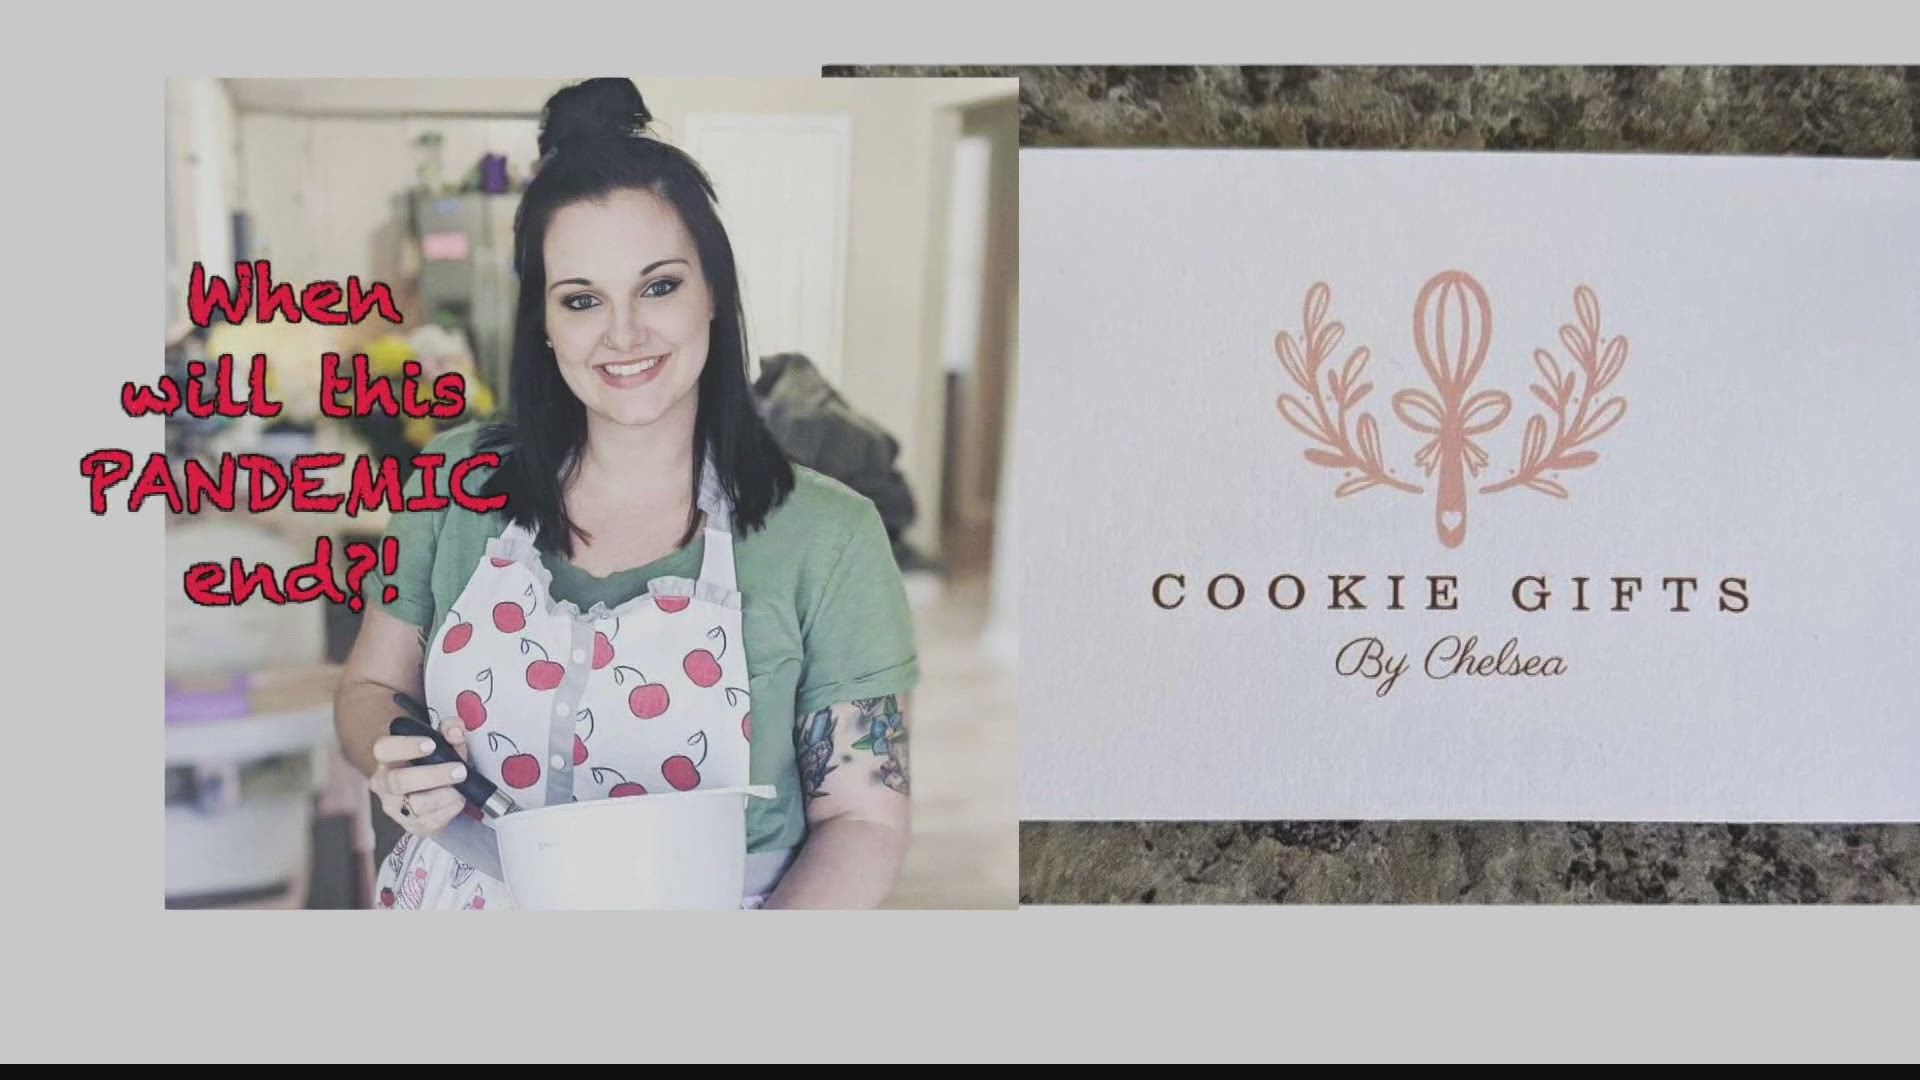 Chelsea Walsman had been a certified dog groomer for years. But in the middle of the pandemic, she decided to start designing, baking and decorating cookies.